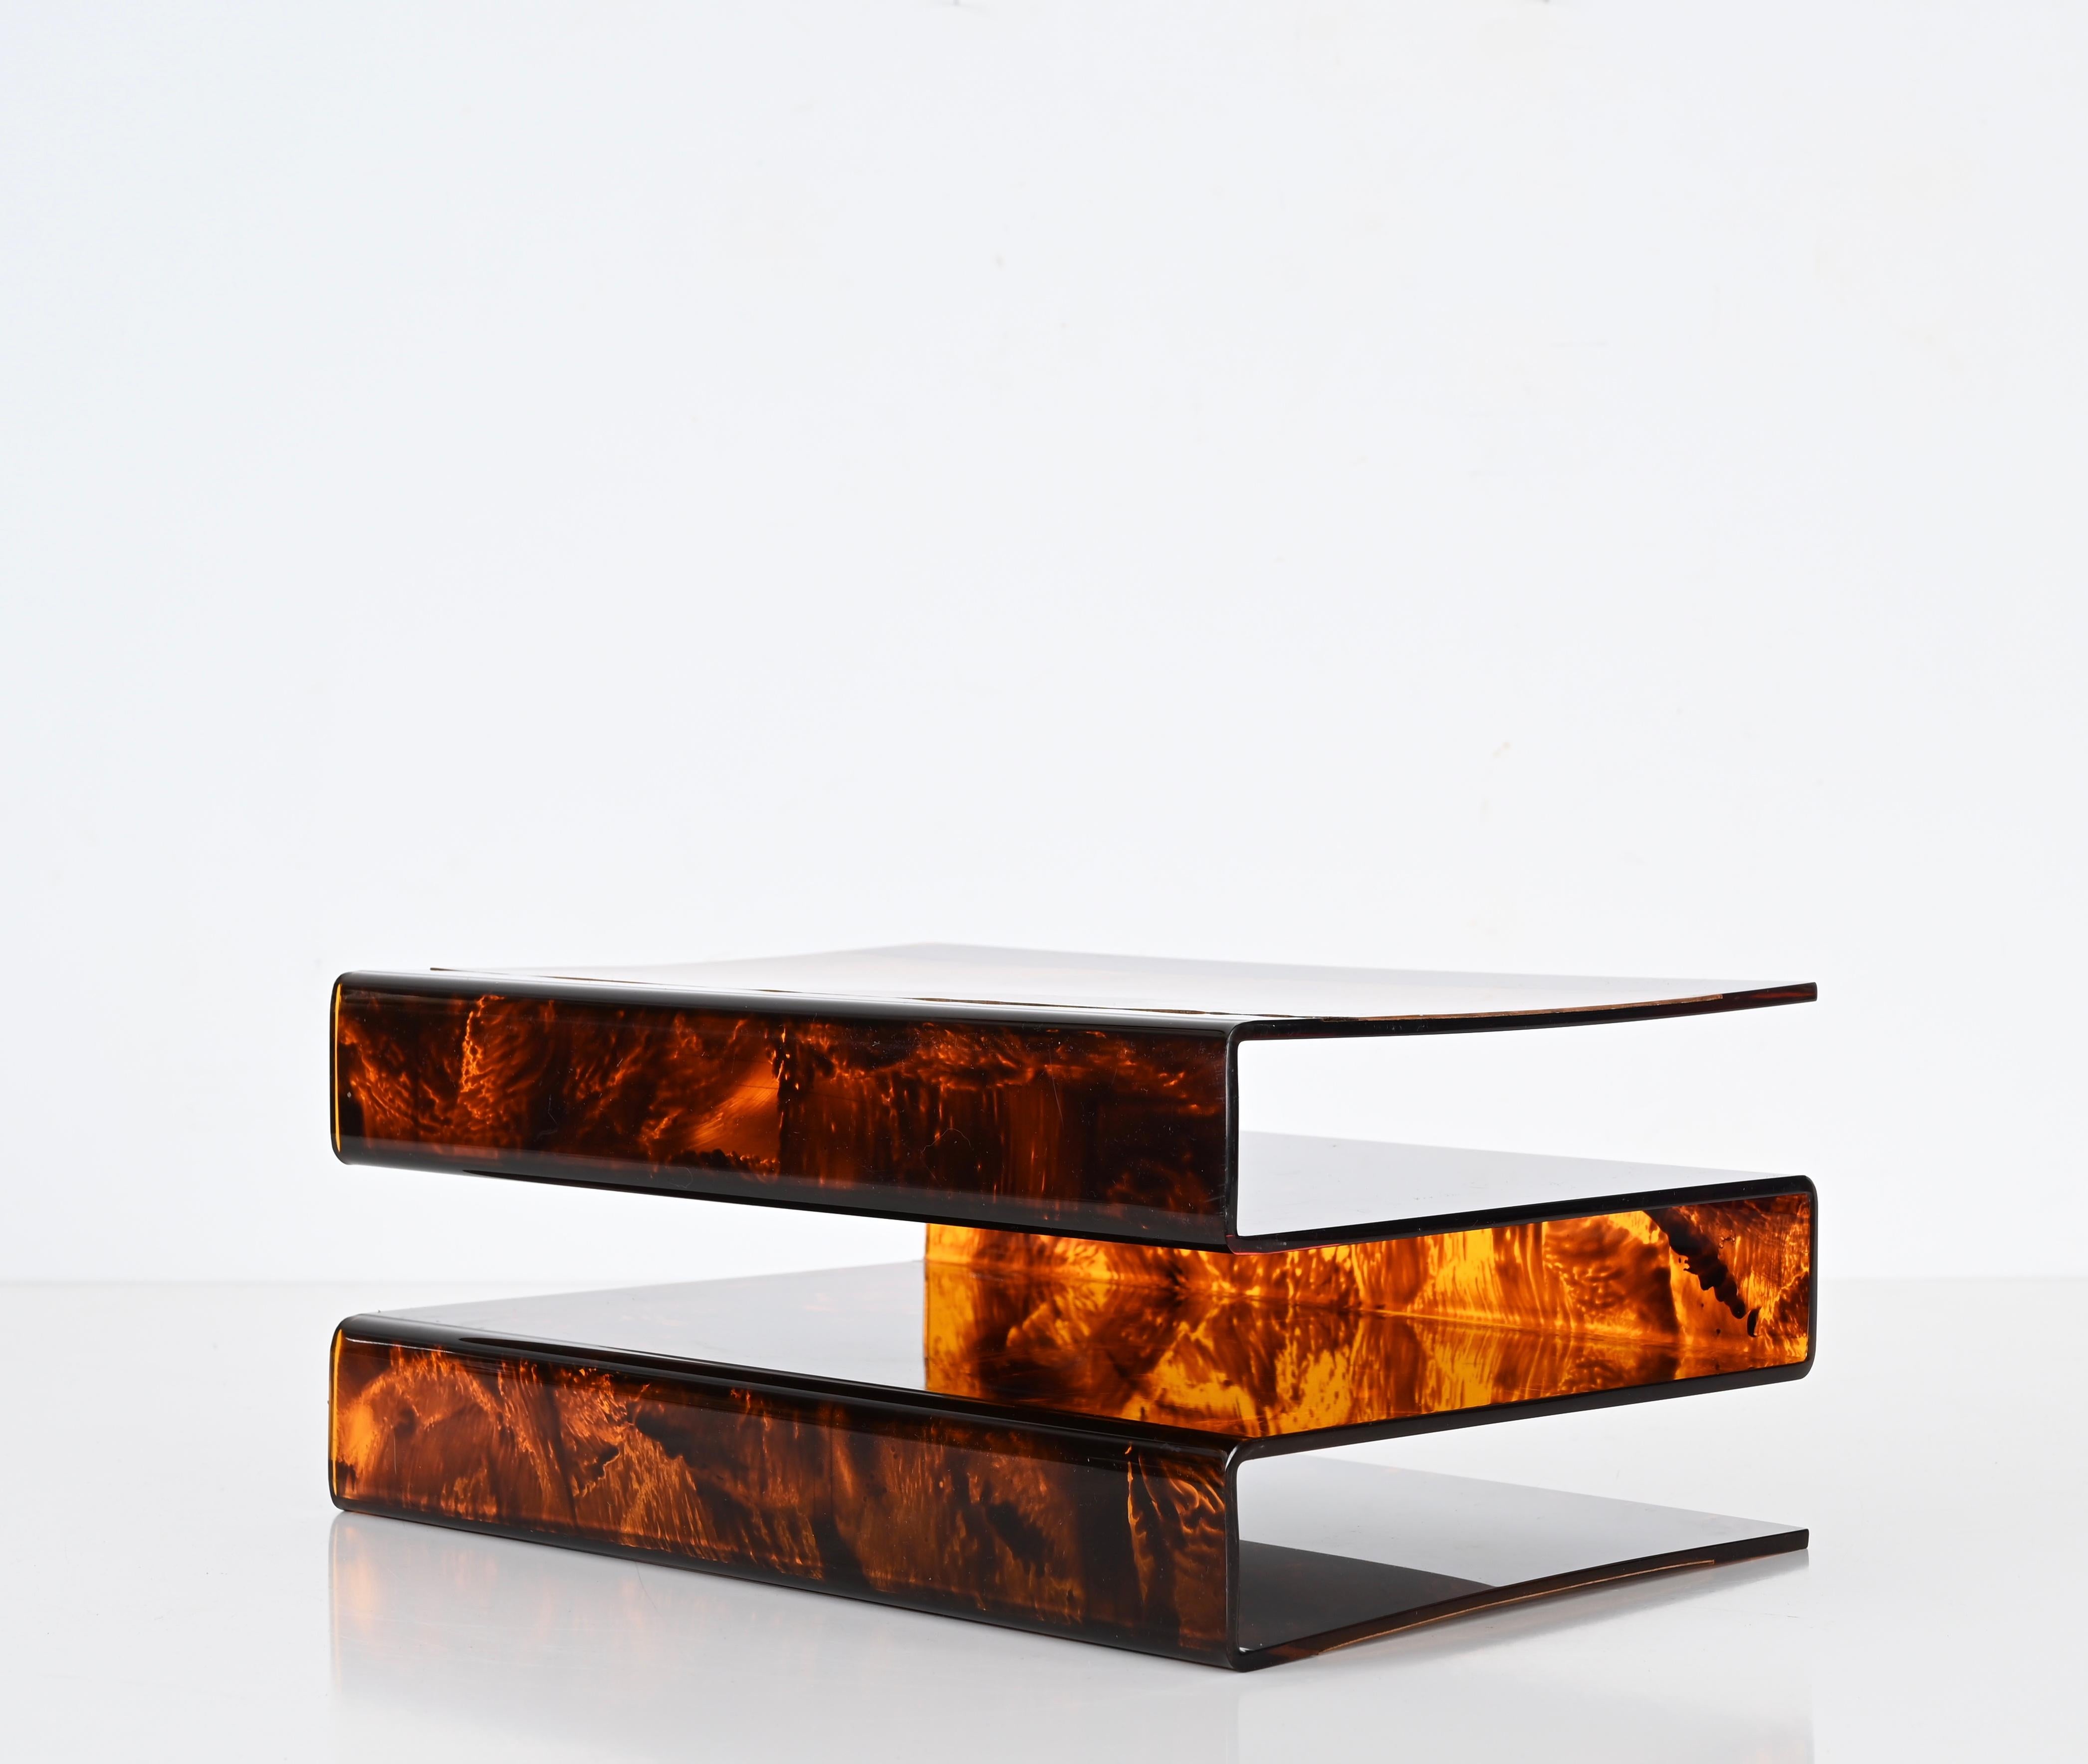 Guzzini Magazine Rack in Tortoiseshell Lucite and Briar, Italy 1970s For Sale 5